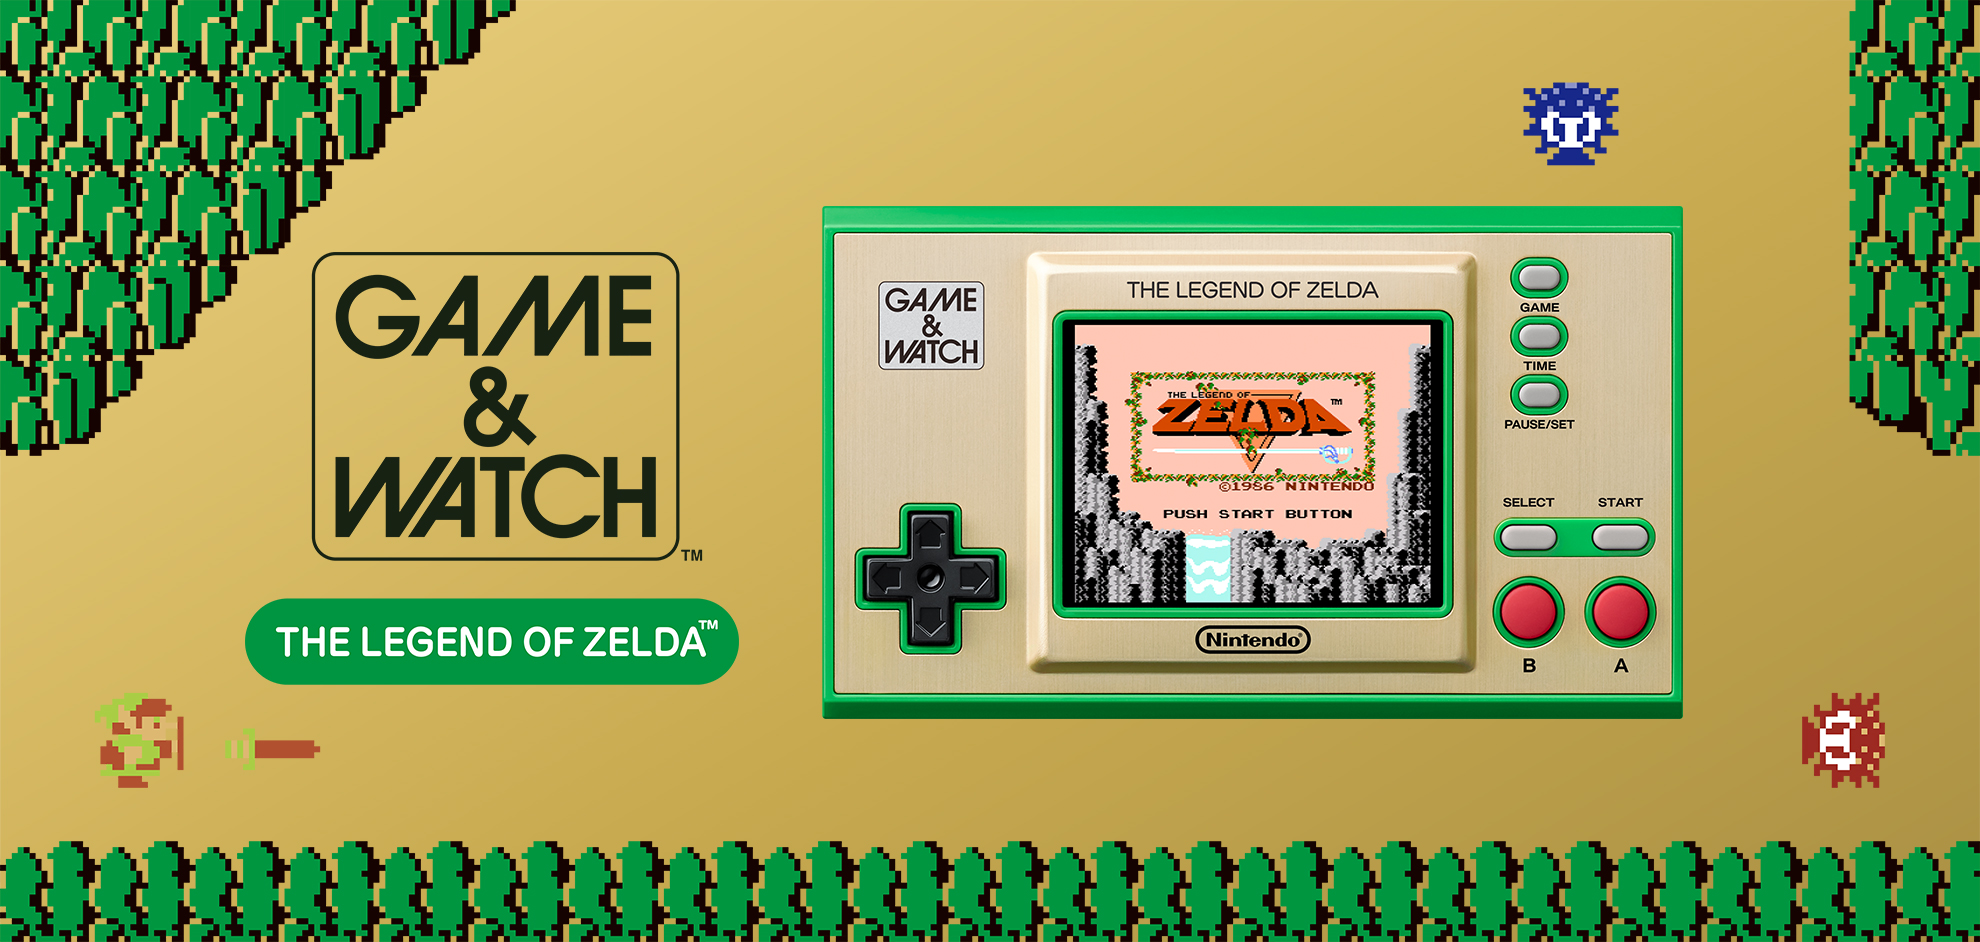 Game & Watch™: The Legend of Zelda™ System – Nintendo Product